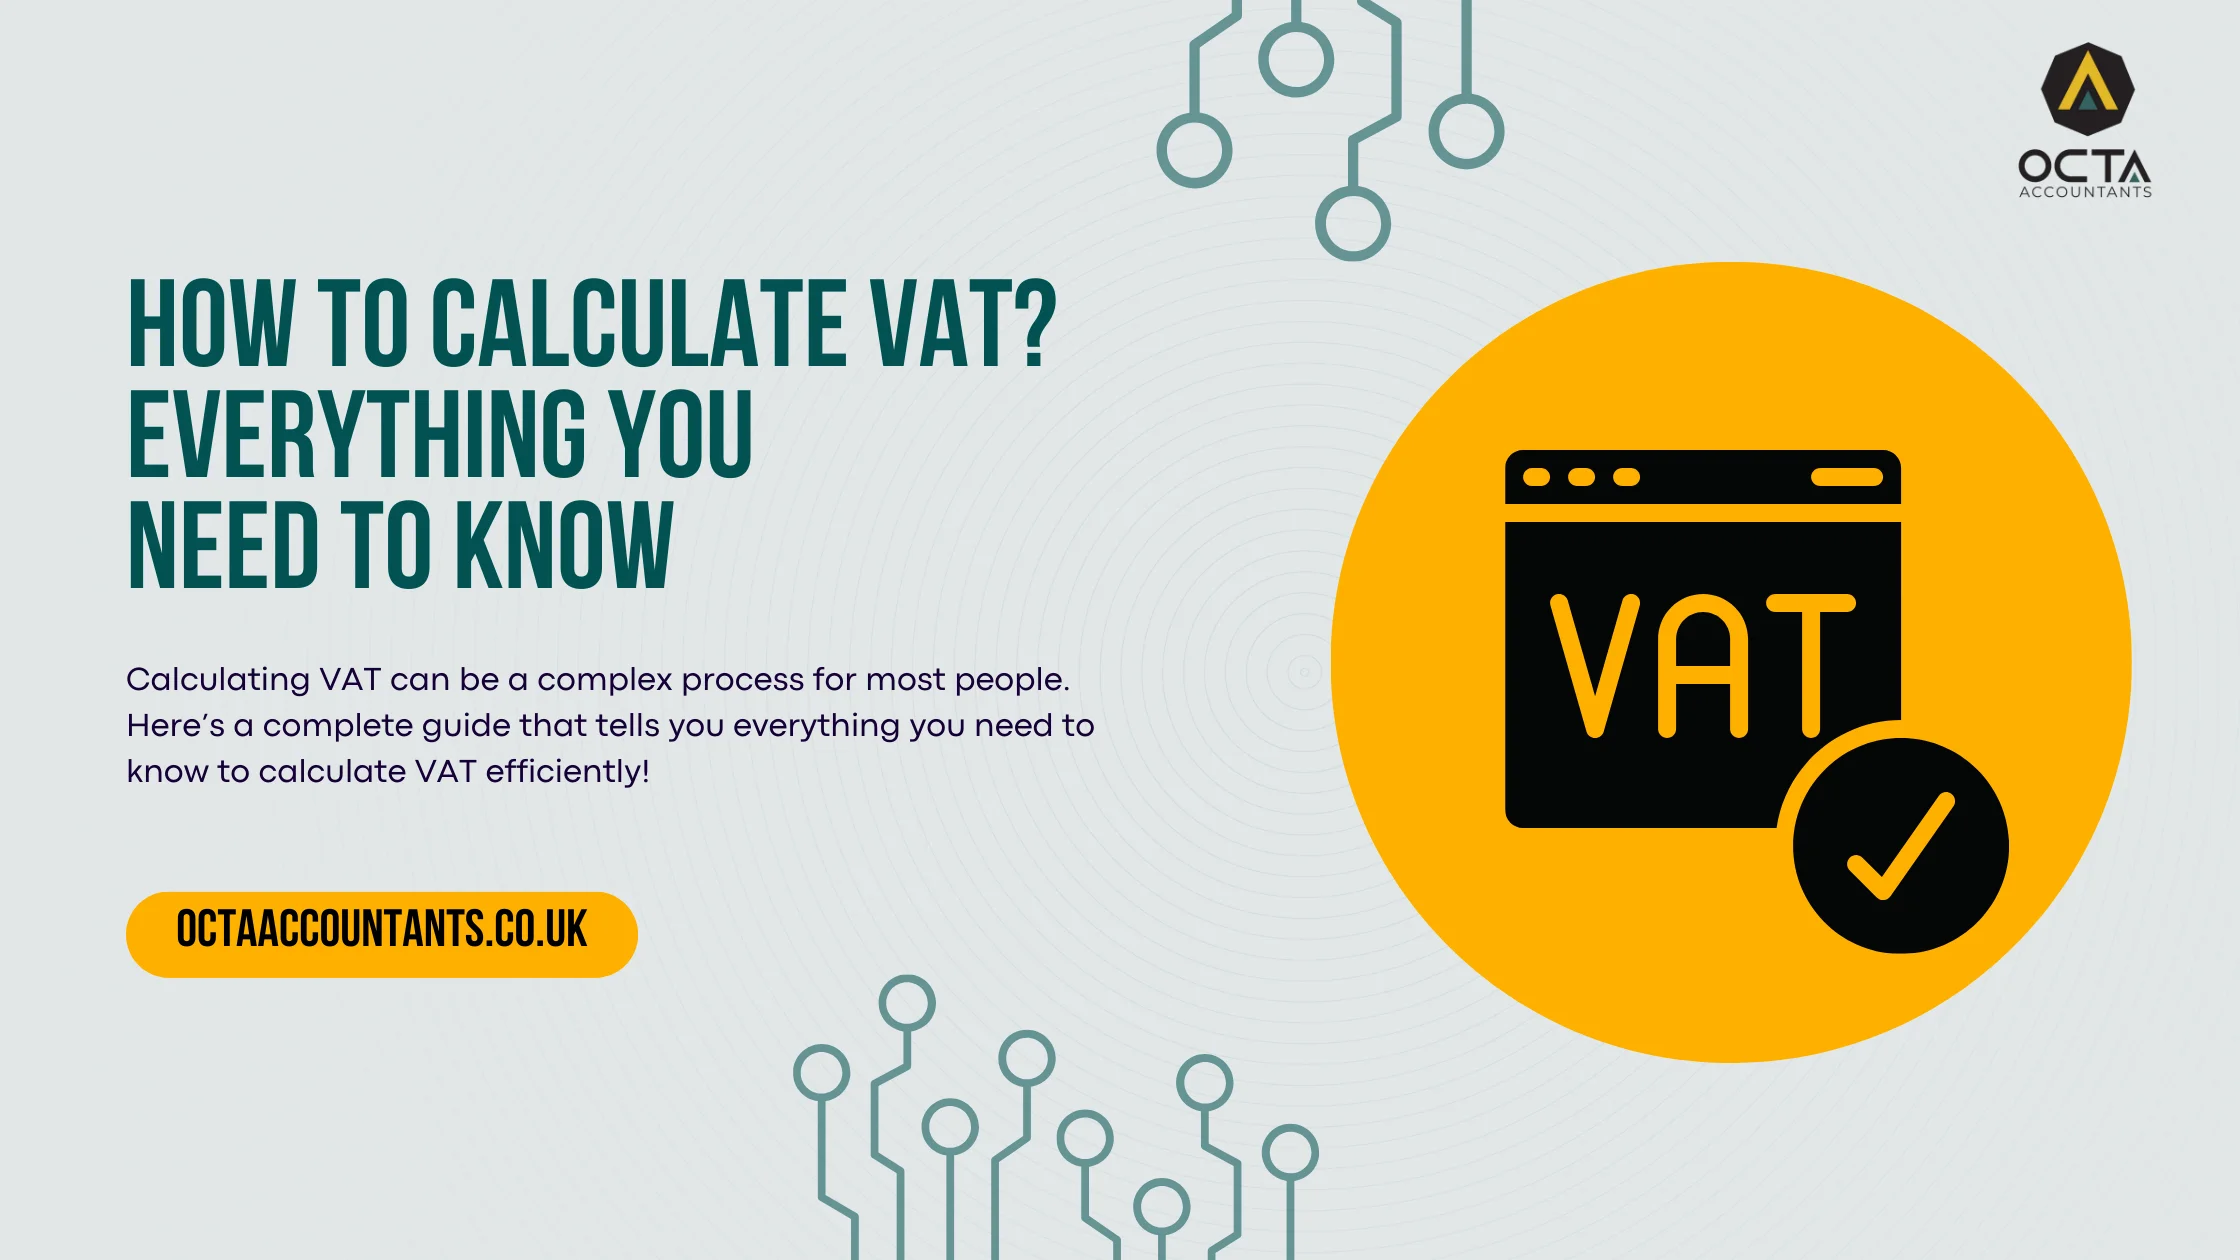 How to calculate VAT?